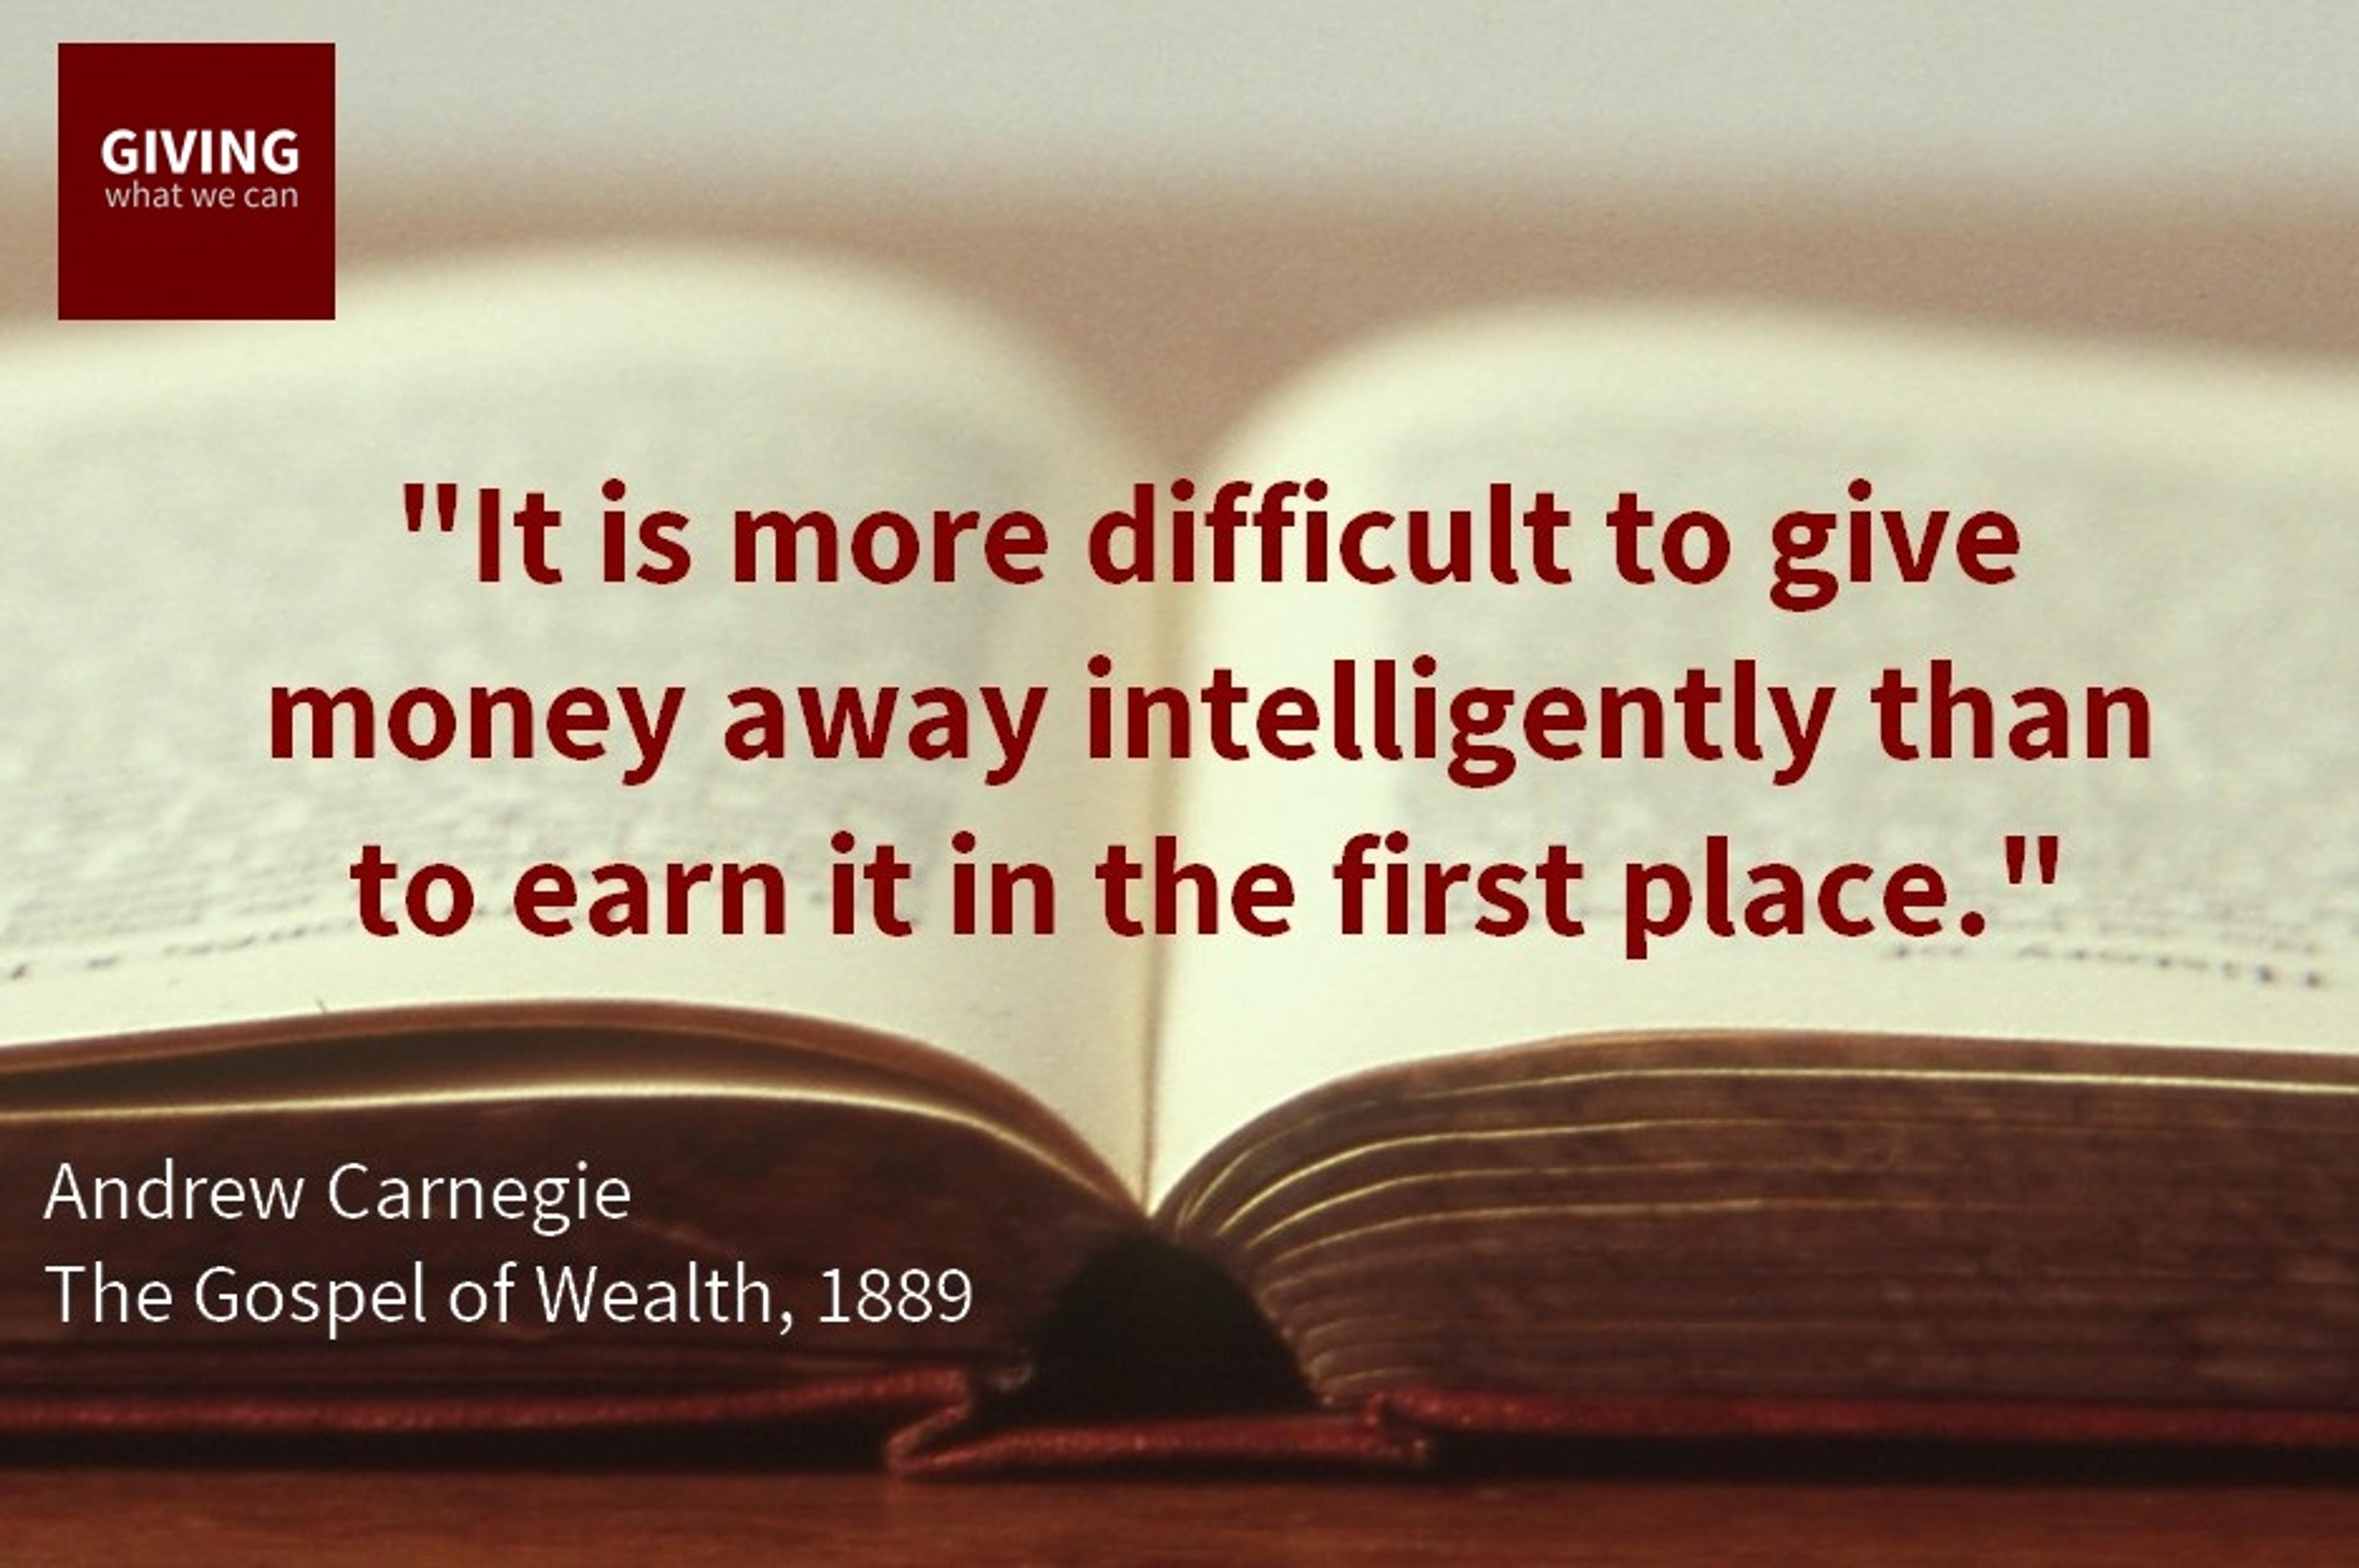 It is more difficult to give money away intelligently than to earn it in the first place